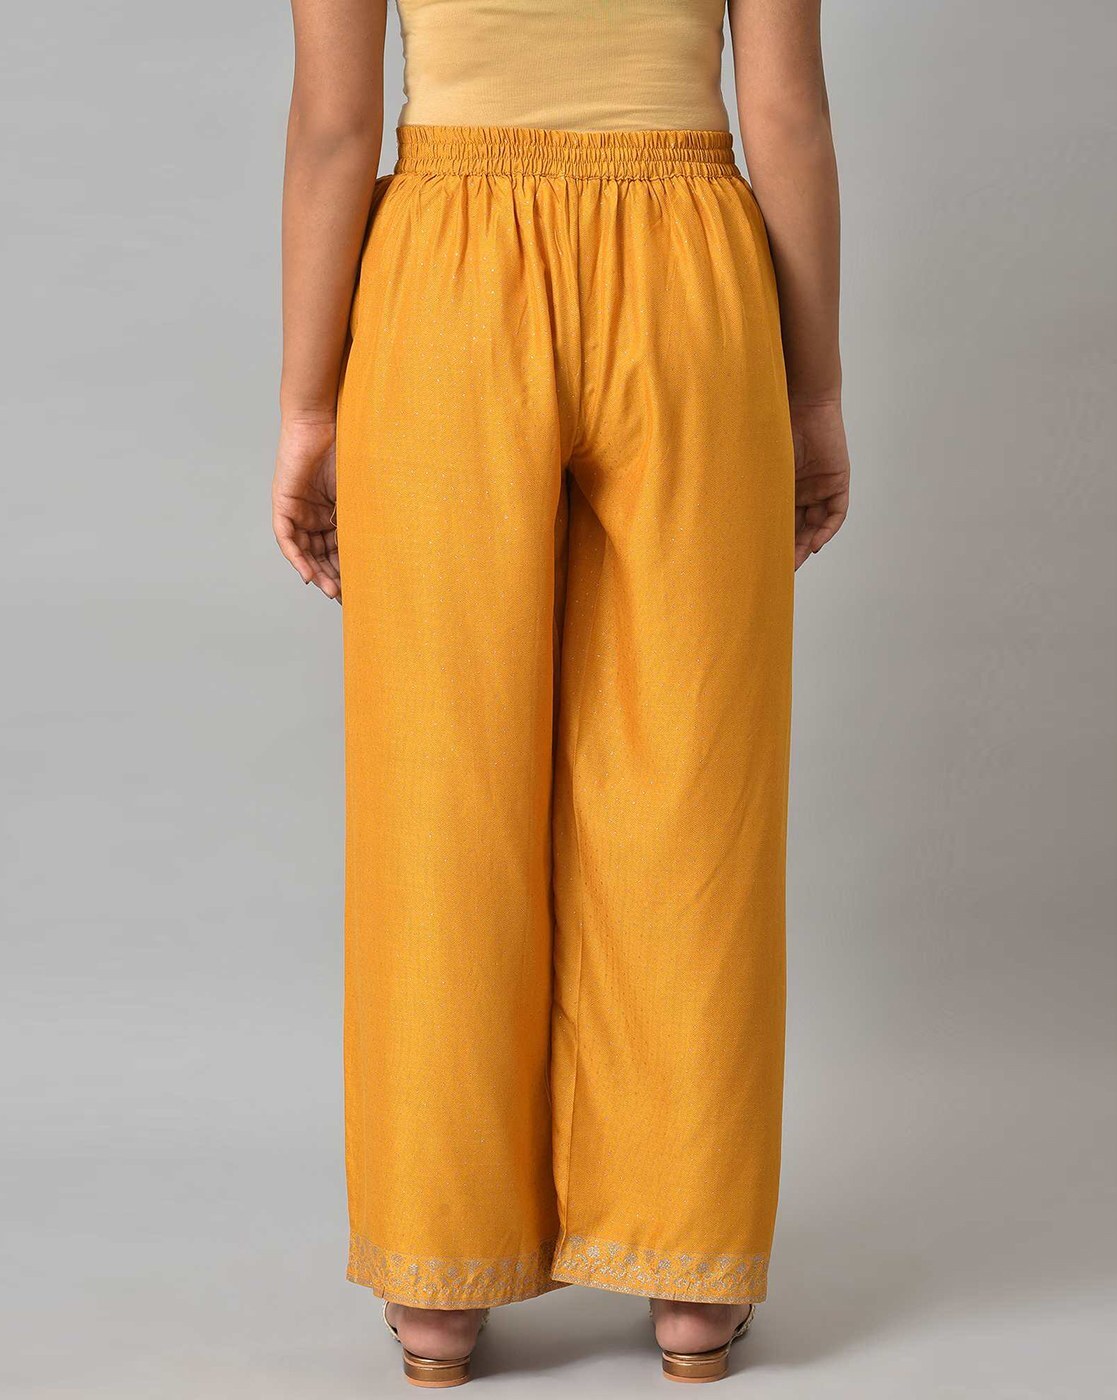 Made by Johnny Women's Pleated Wide Leg Pants with Elastic Waist Band L  MUSTARD - Walmart.com